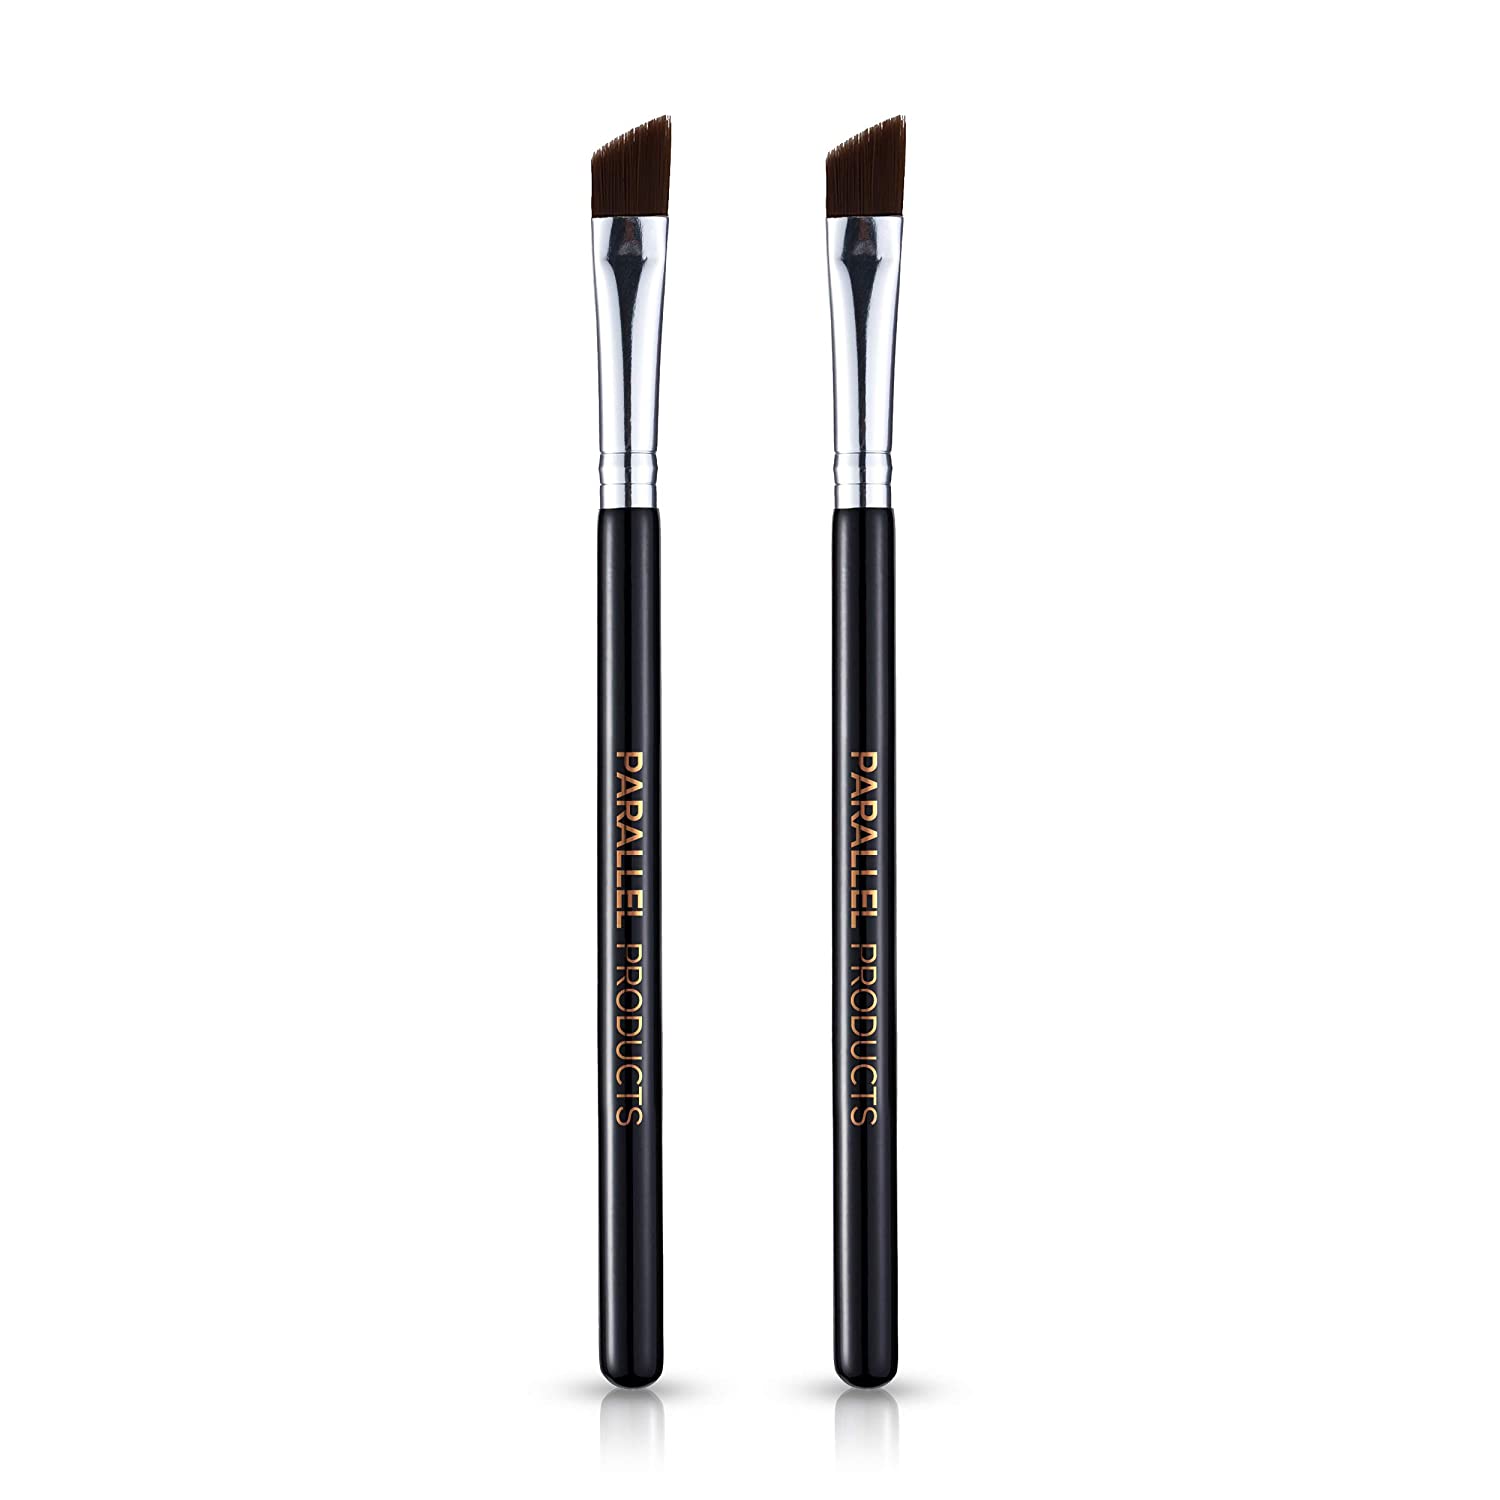 Parallel Products The Brow Brush Premium Angled Brow Brush Makeup Brush 2 Pack Side by Side